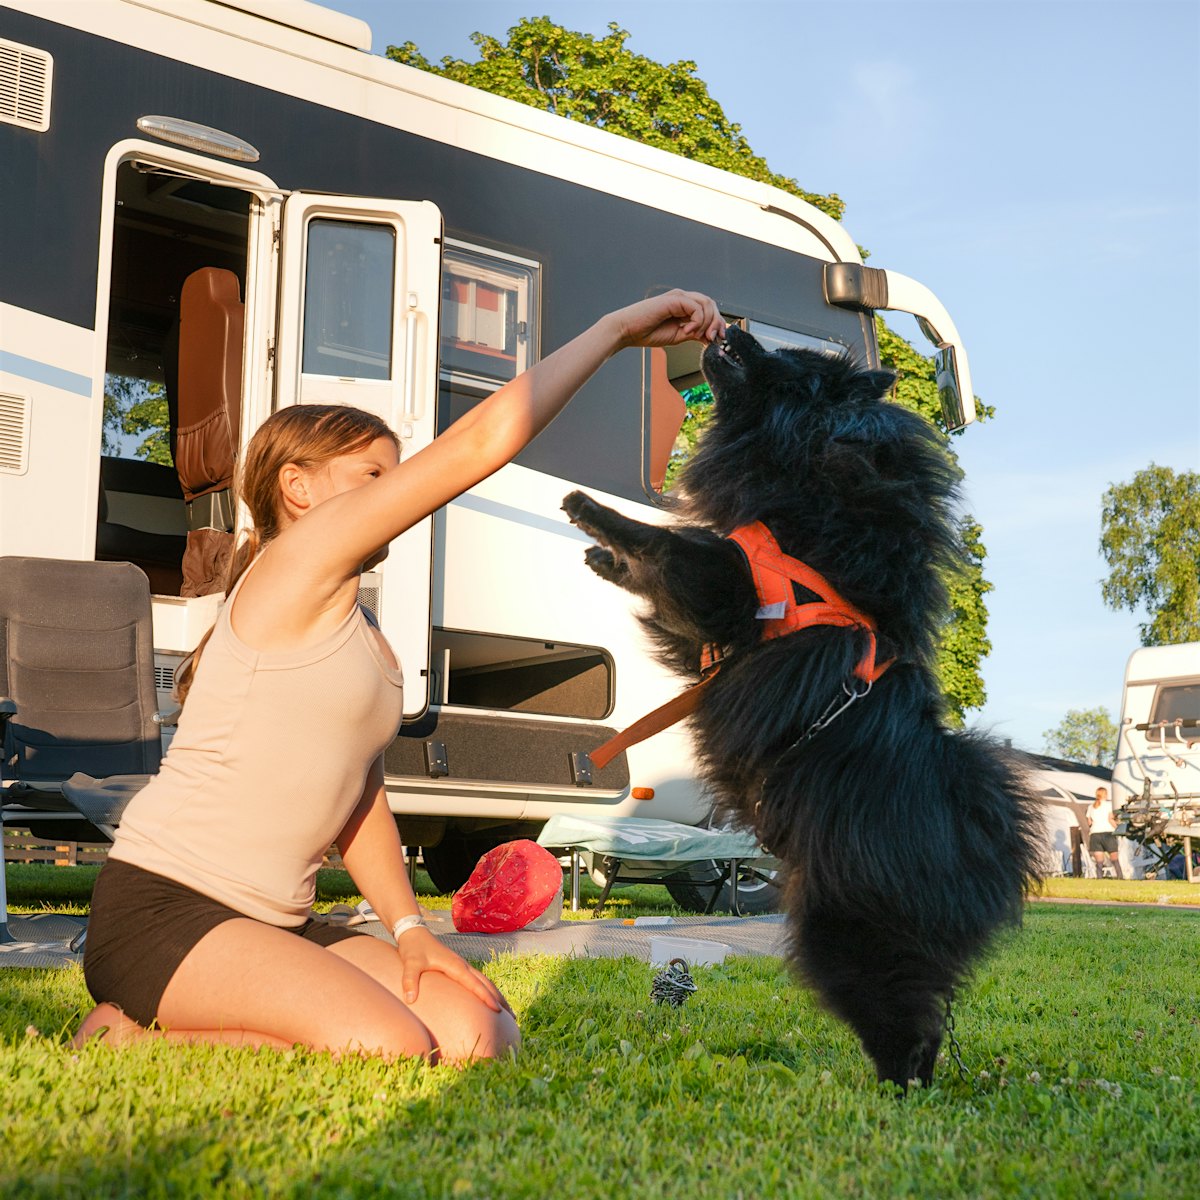 Girl plays with dog outside mobile home. Photo